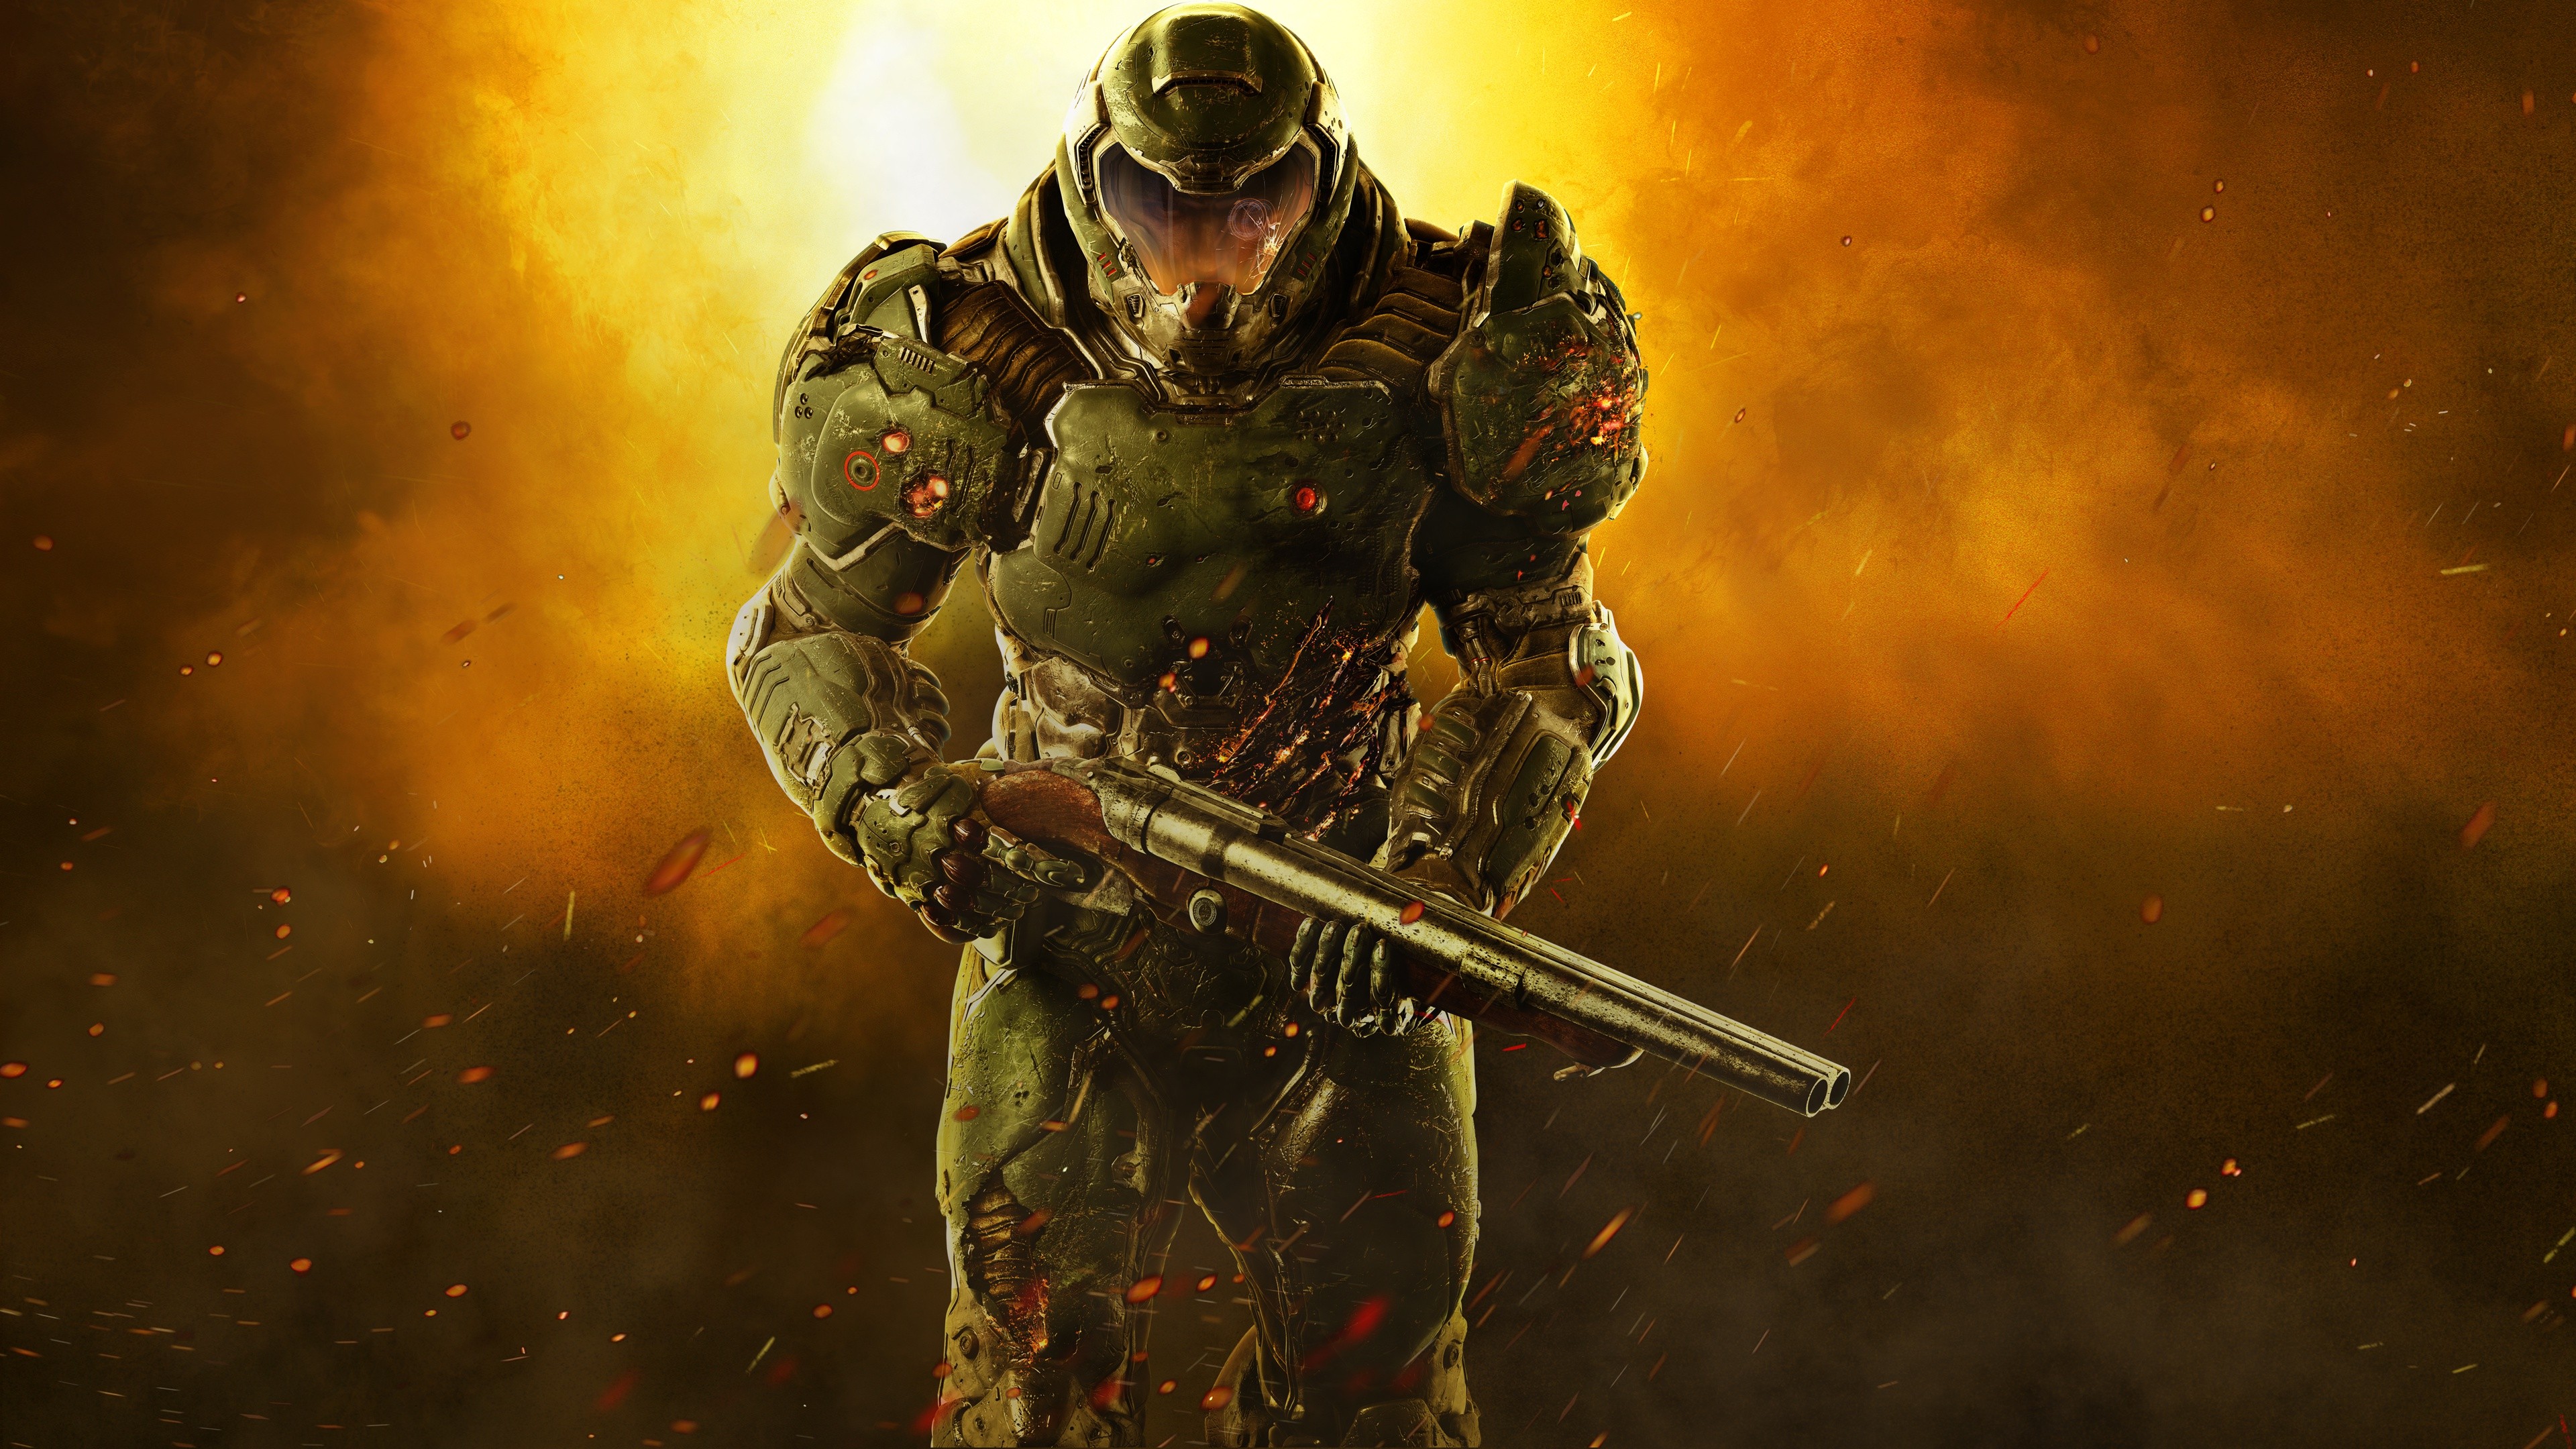 doom wallpaper,action adventure game,pc game,soldier,games,shooter game